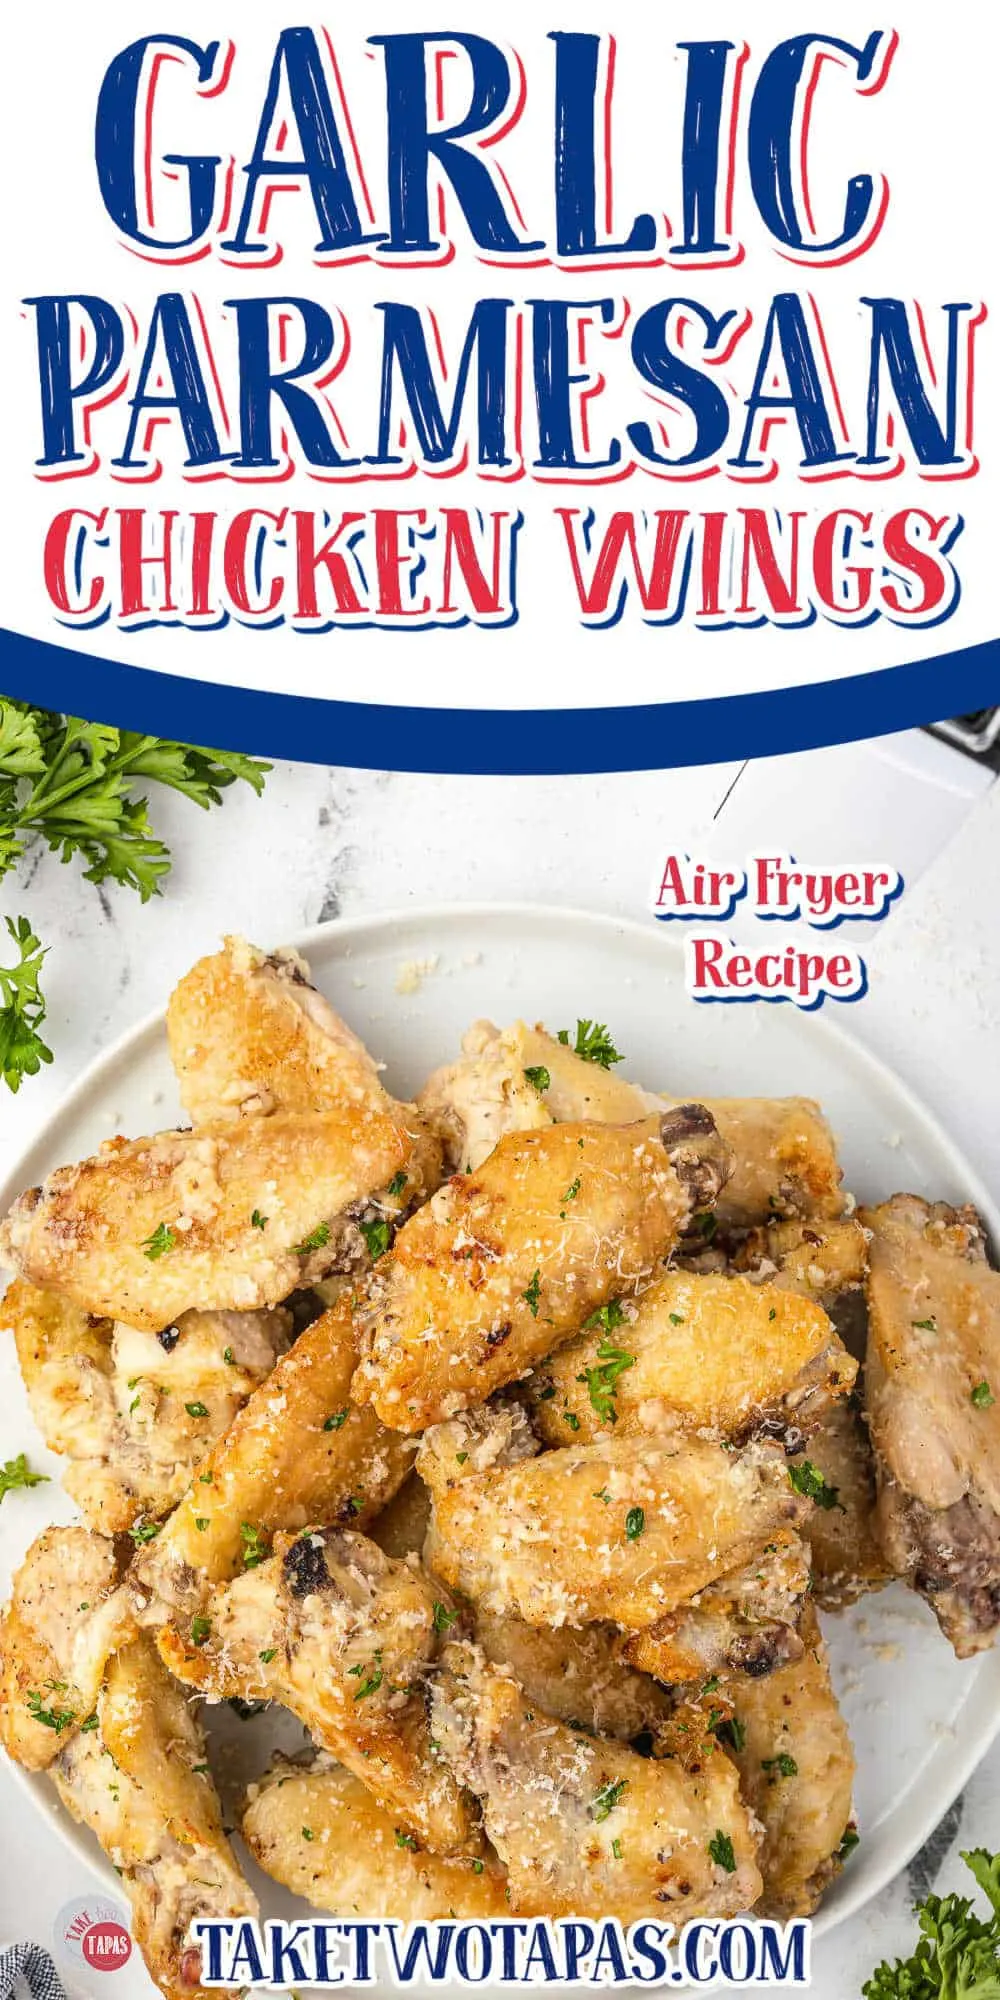 garlic parmesan chicken wings on a plate with white banner and text "air fryer recipe"